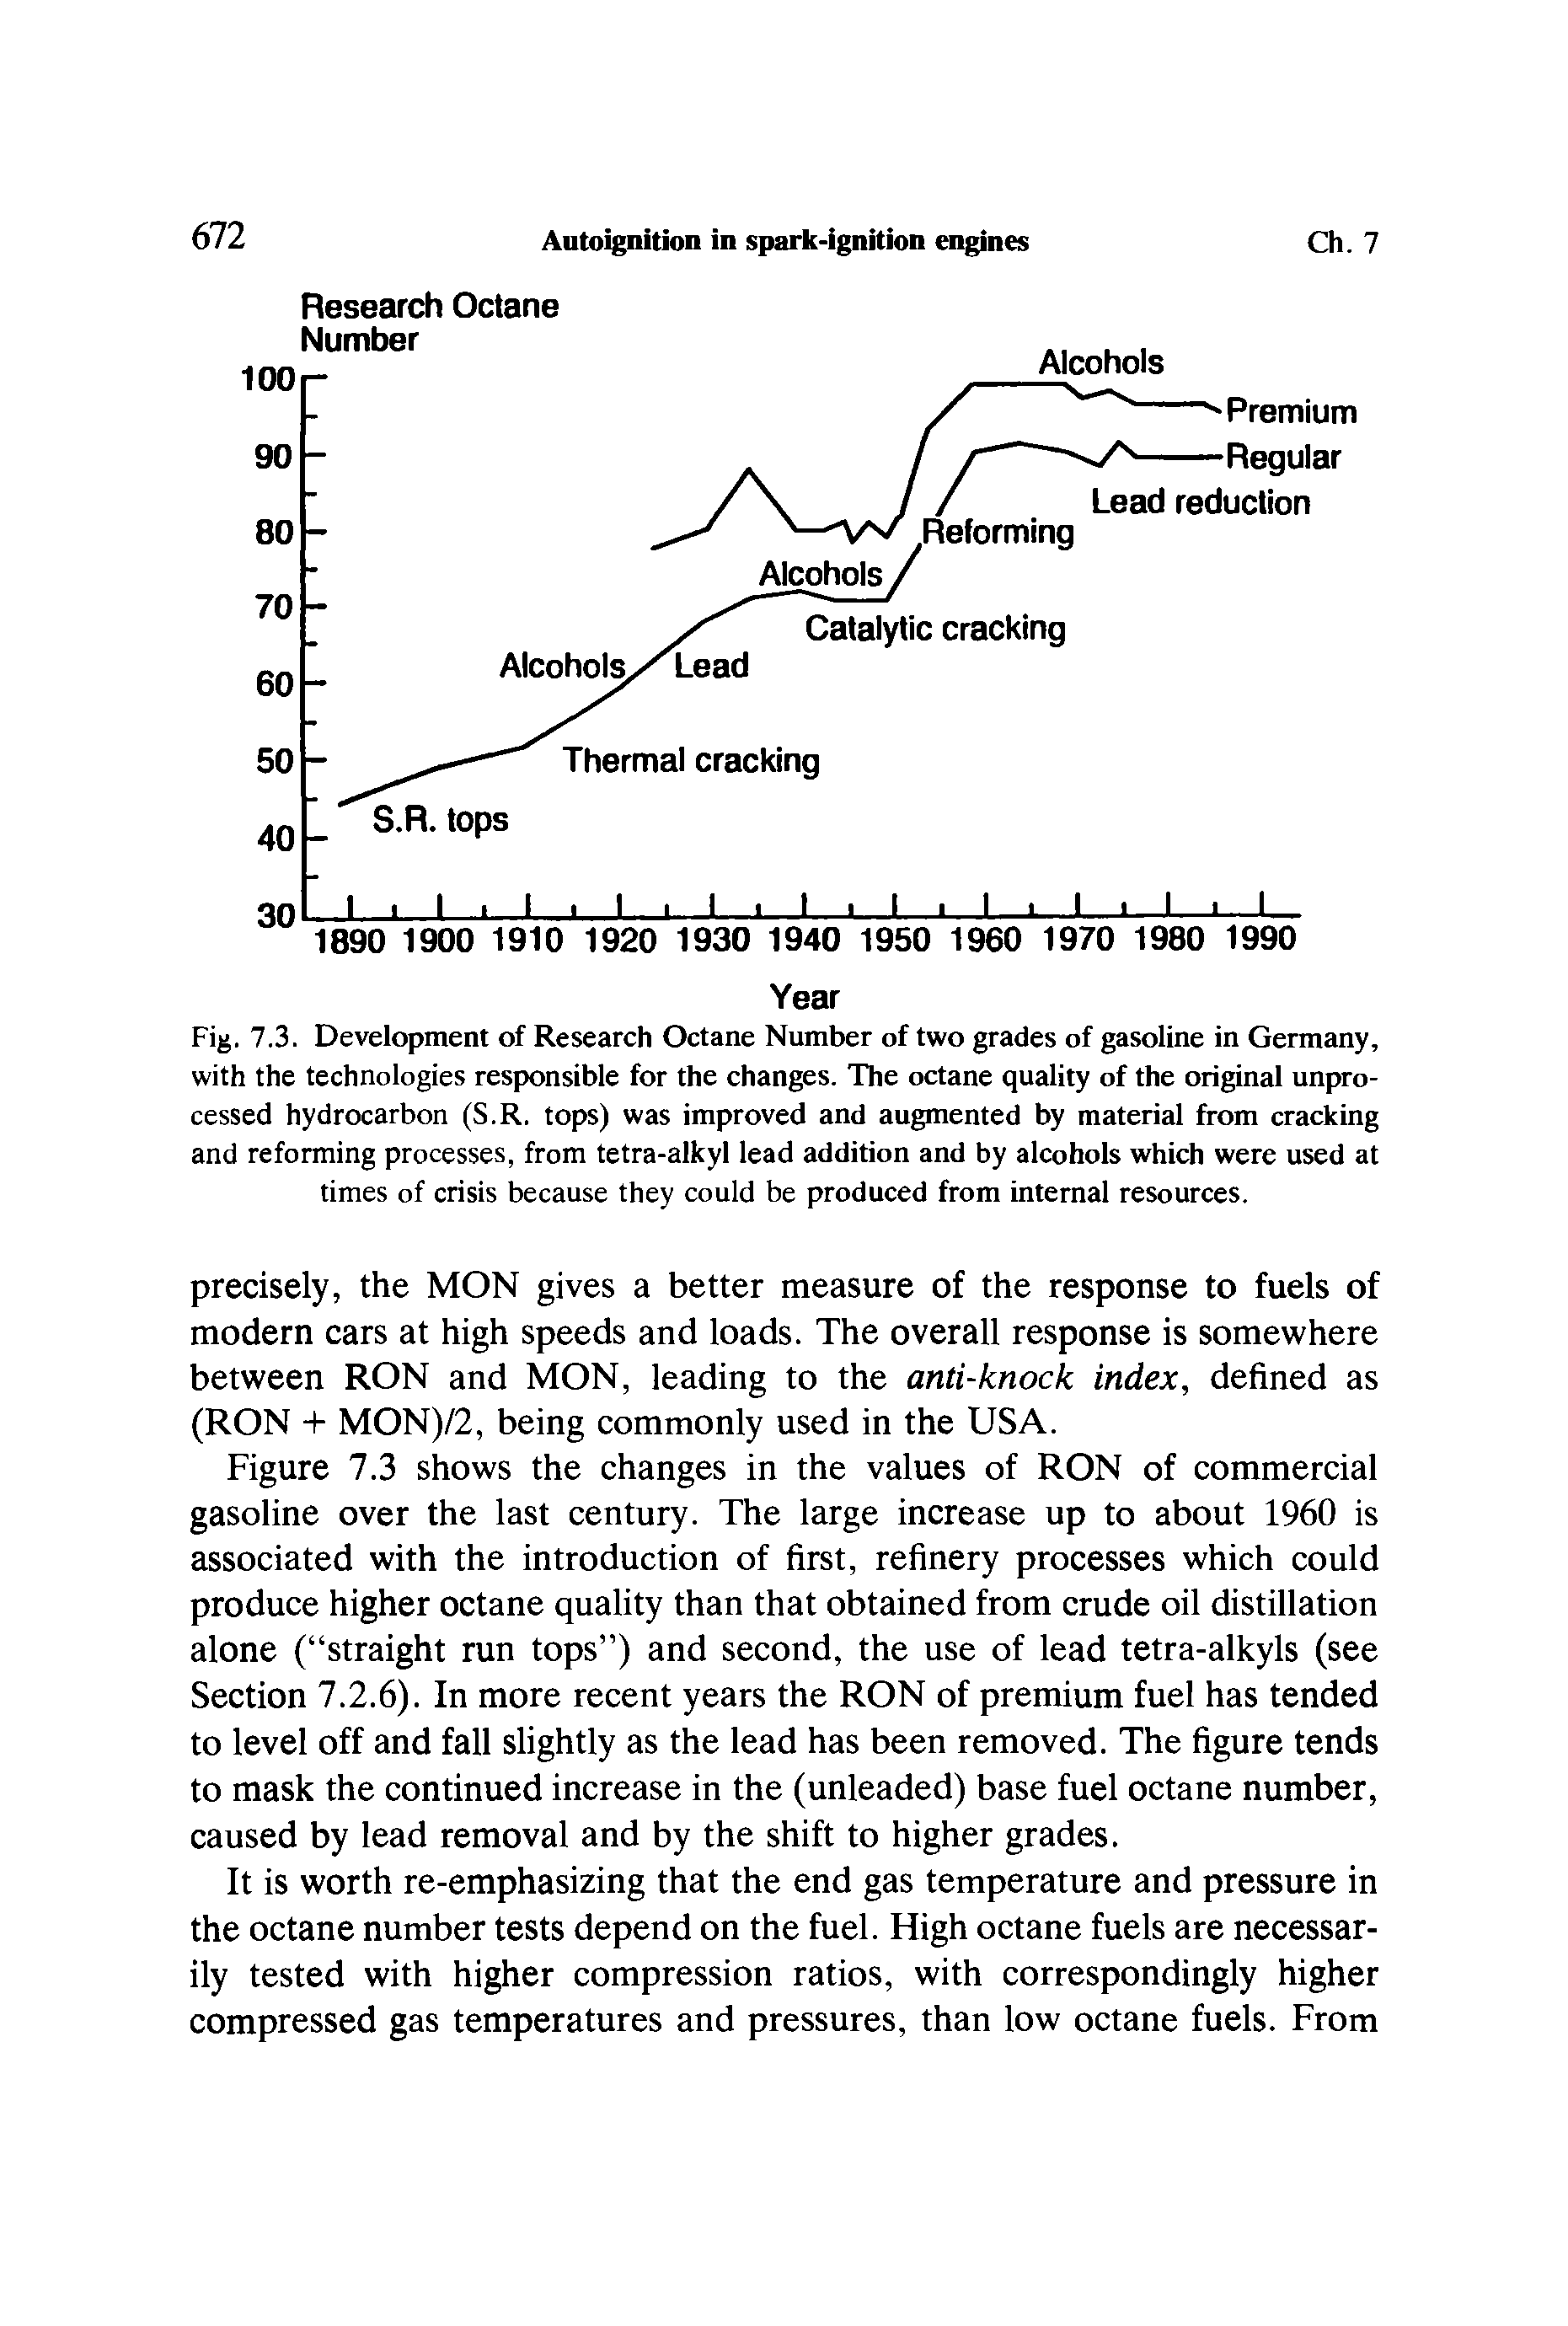 Fig. 7.3. Development of Research Octane Number of two grades of gasoline in Germany, with the technologies responsible for the changes. The octane quality of the original unprocessed hydrocarbon (S.R. tops) was improved and augmented by material from cracking and reforming processes, from tetra-alkyl lead addition and by alcohols which were used at times of crisis because they could be produced from internal resources.